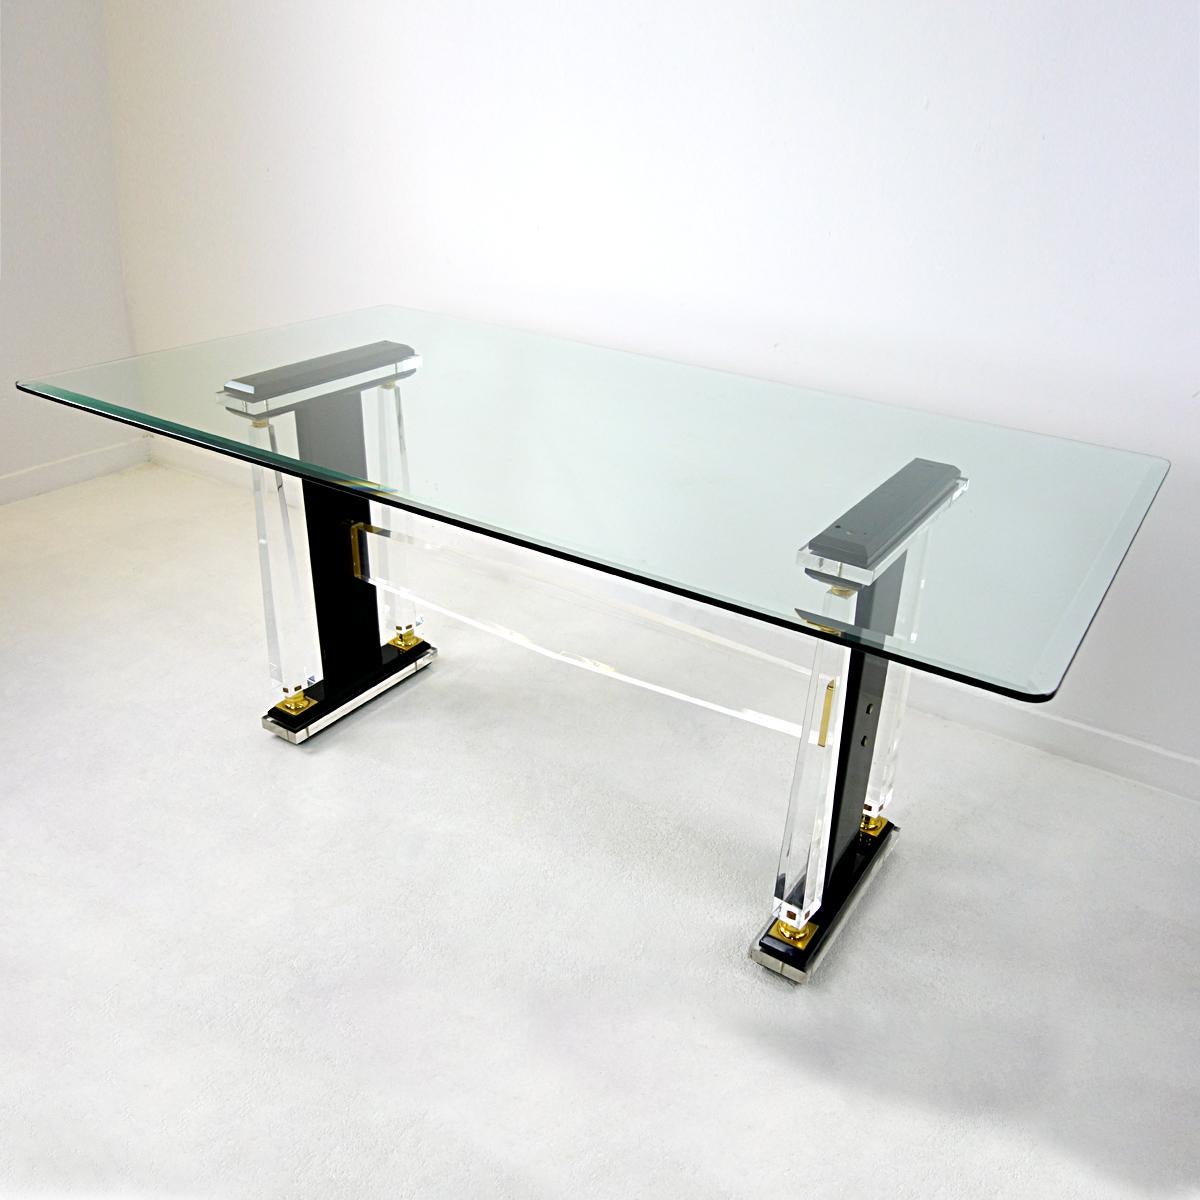 Stunning rectangular dining table in Hollywood Regency style.
Its top is made of glass that has rounded corners. It sits on the frame without being attached. The edges of the glass are cut all around. The frame is made of transparent and black